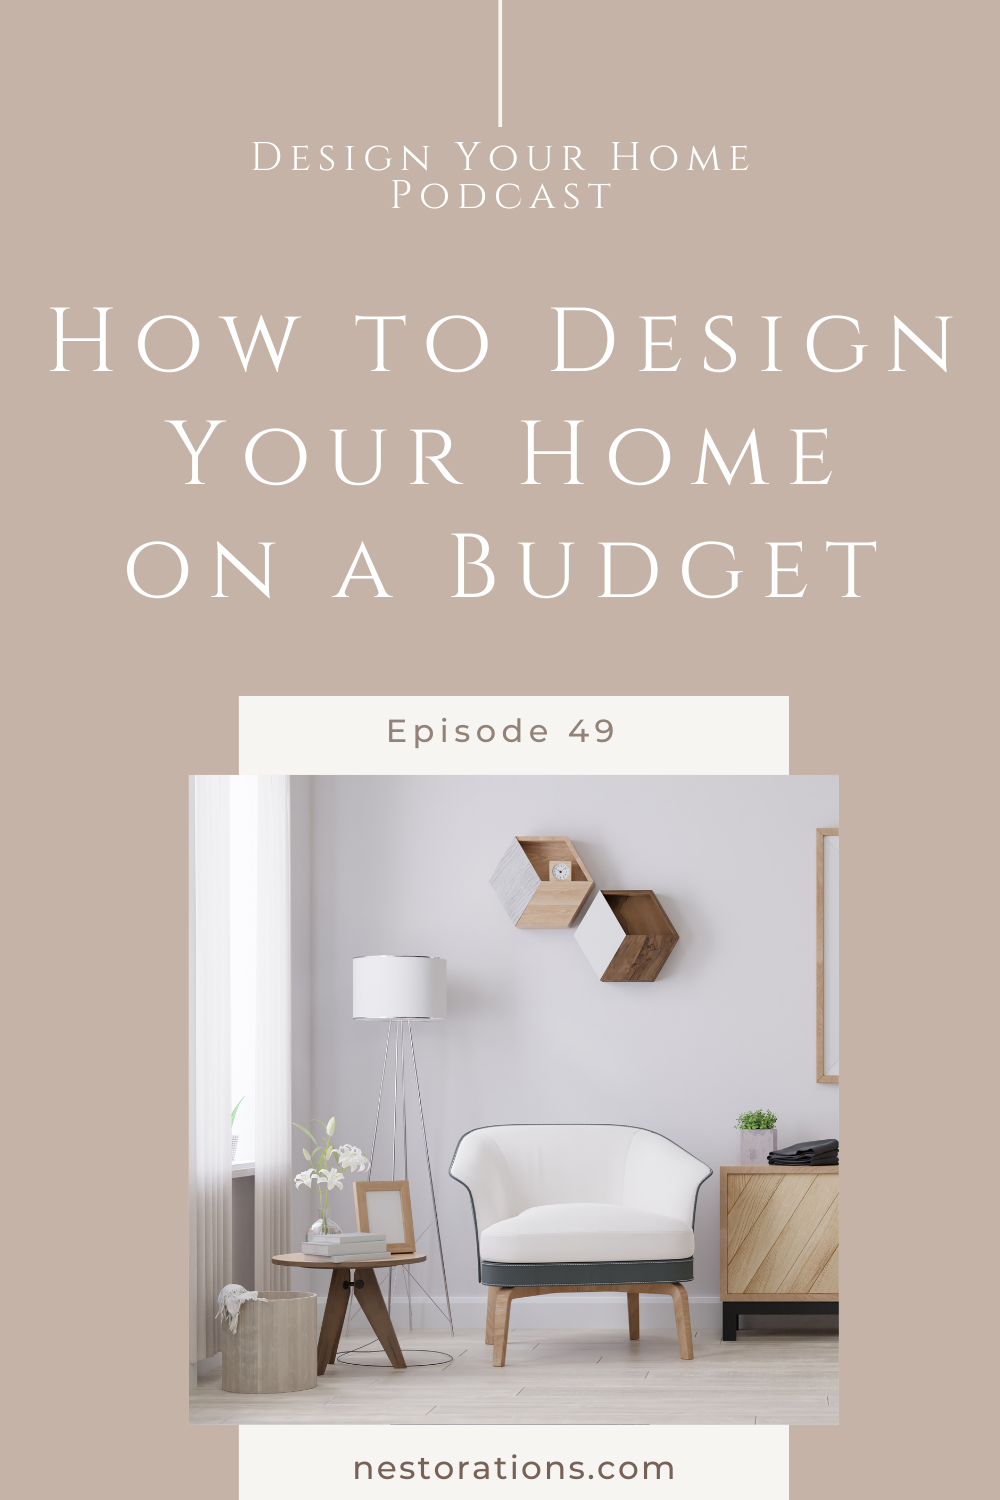 How to Design Your Home on a Budget